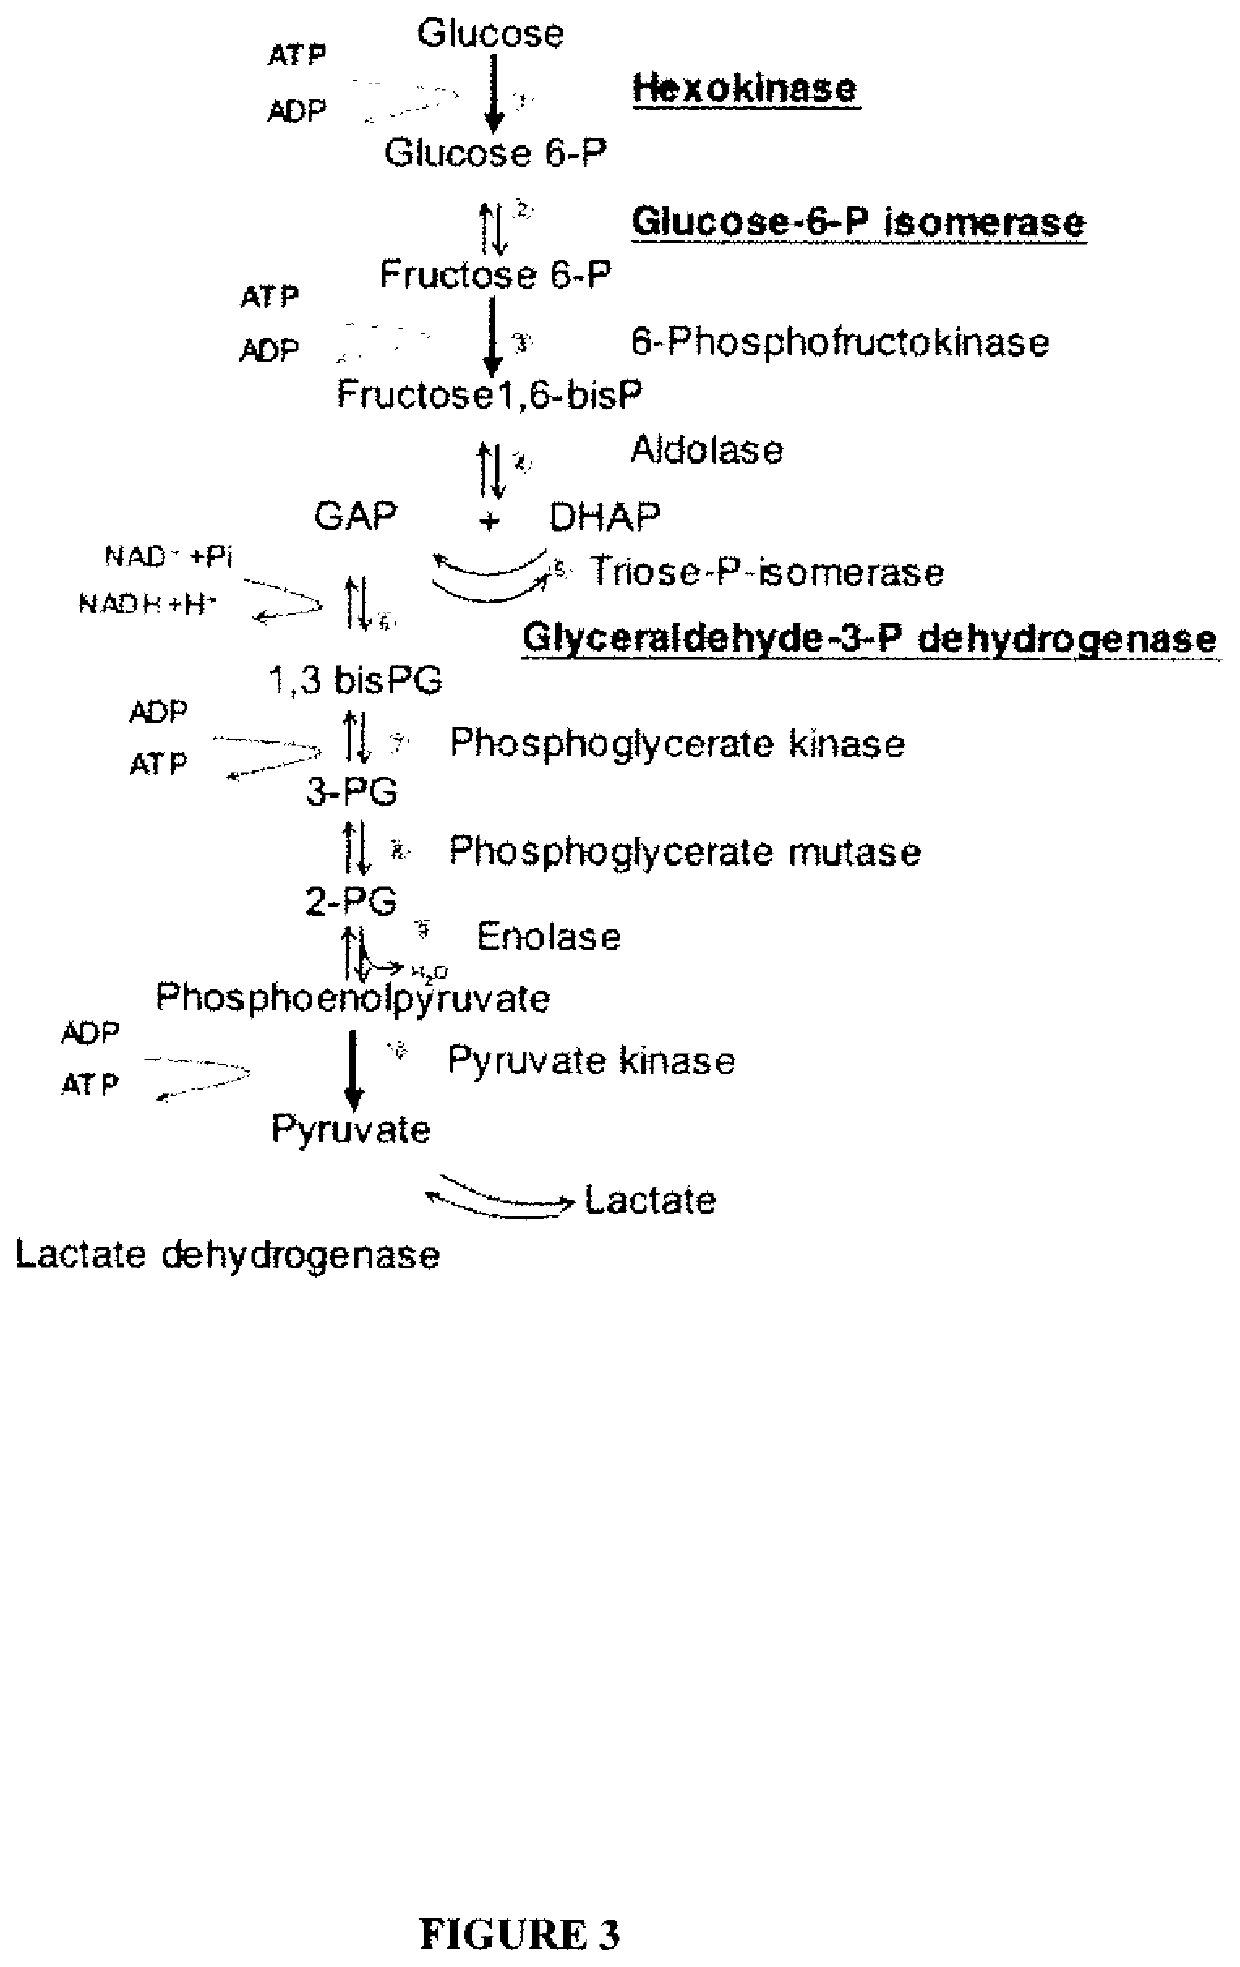 System for production of adenosine triphosphate